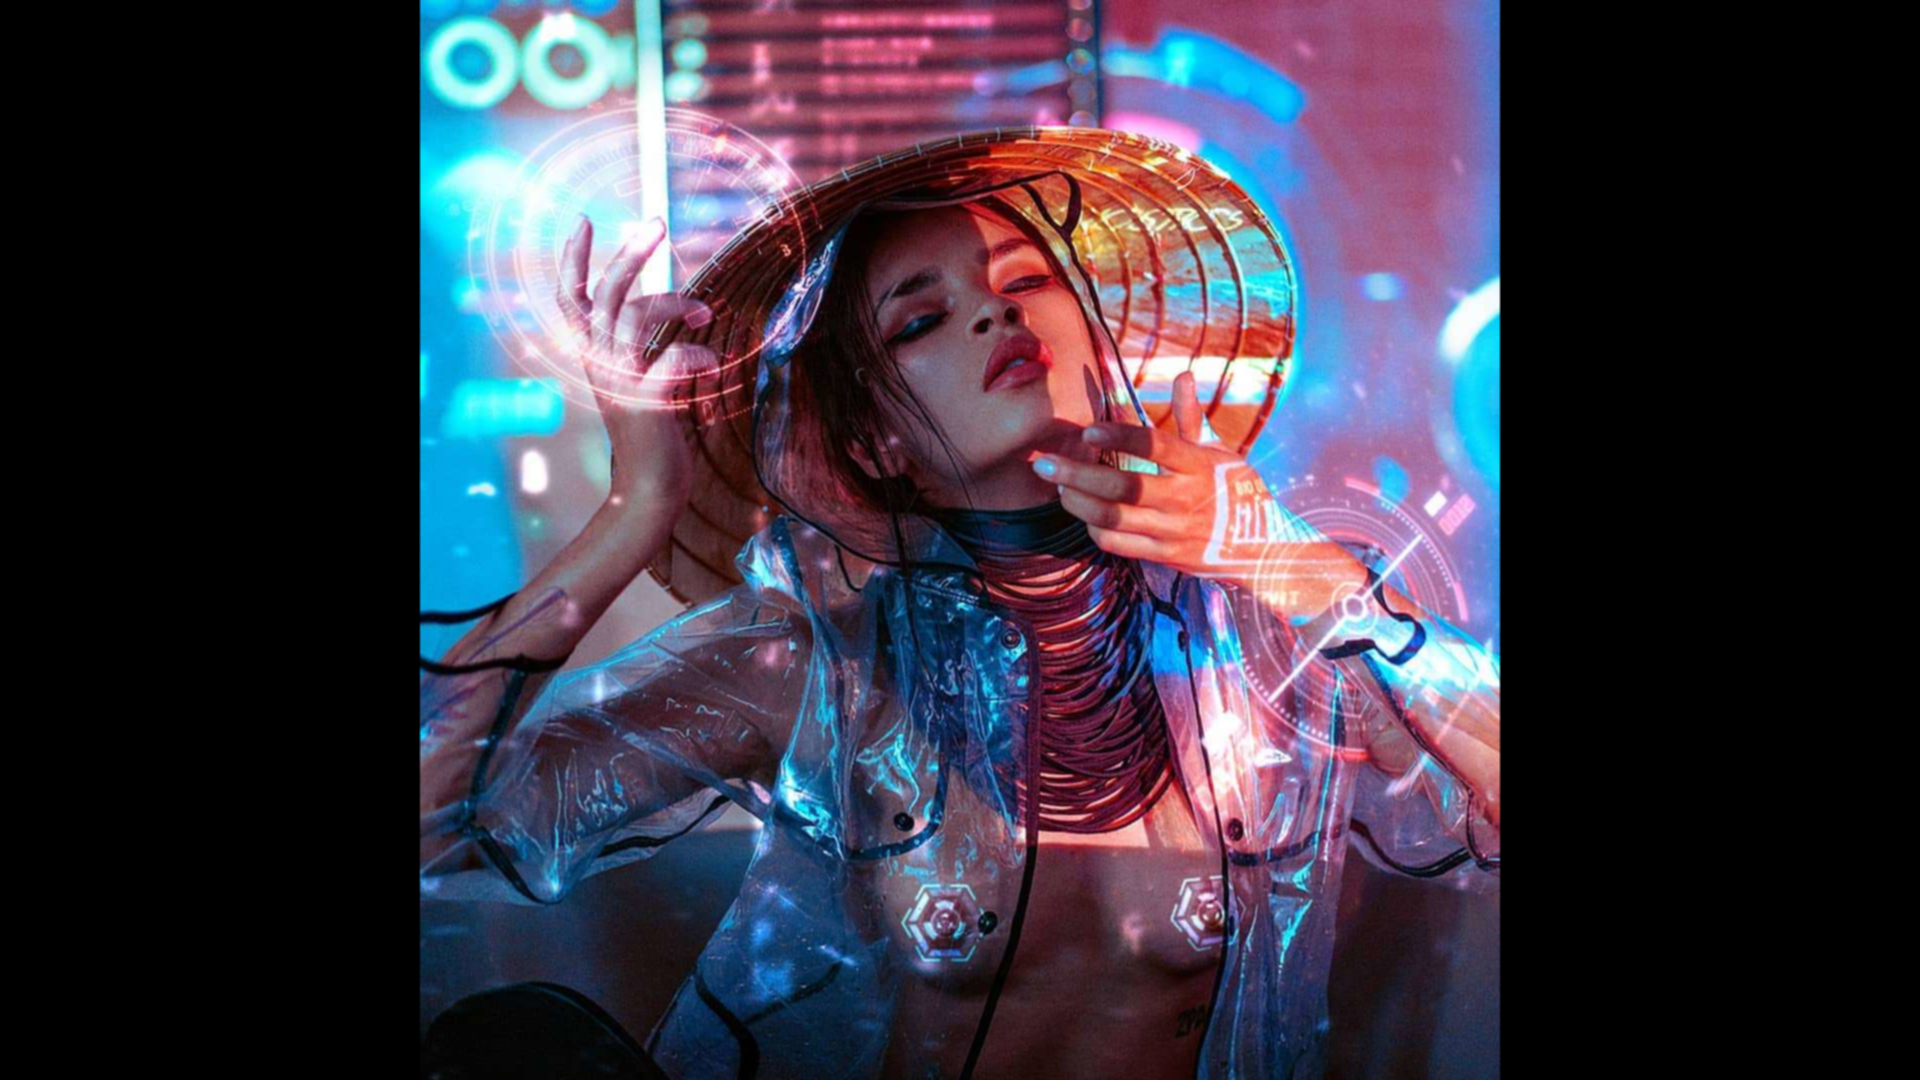 People 1920x1080 cyberpunk women hat see-through clothing strategic covering bamboo hat Asian